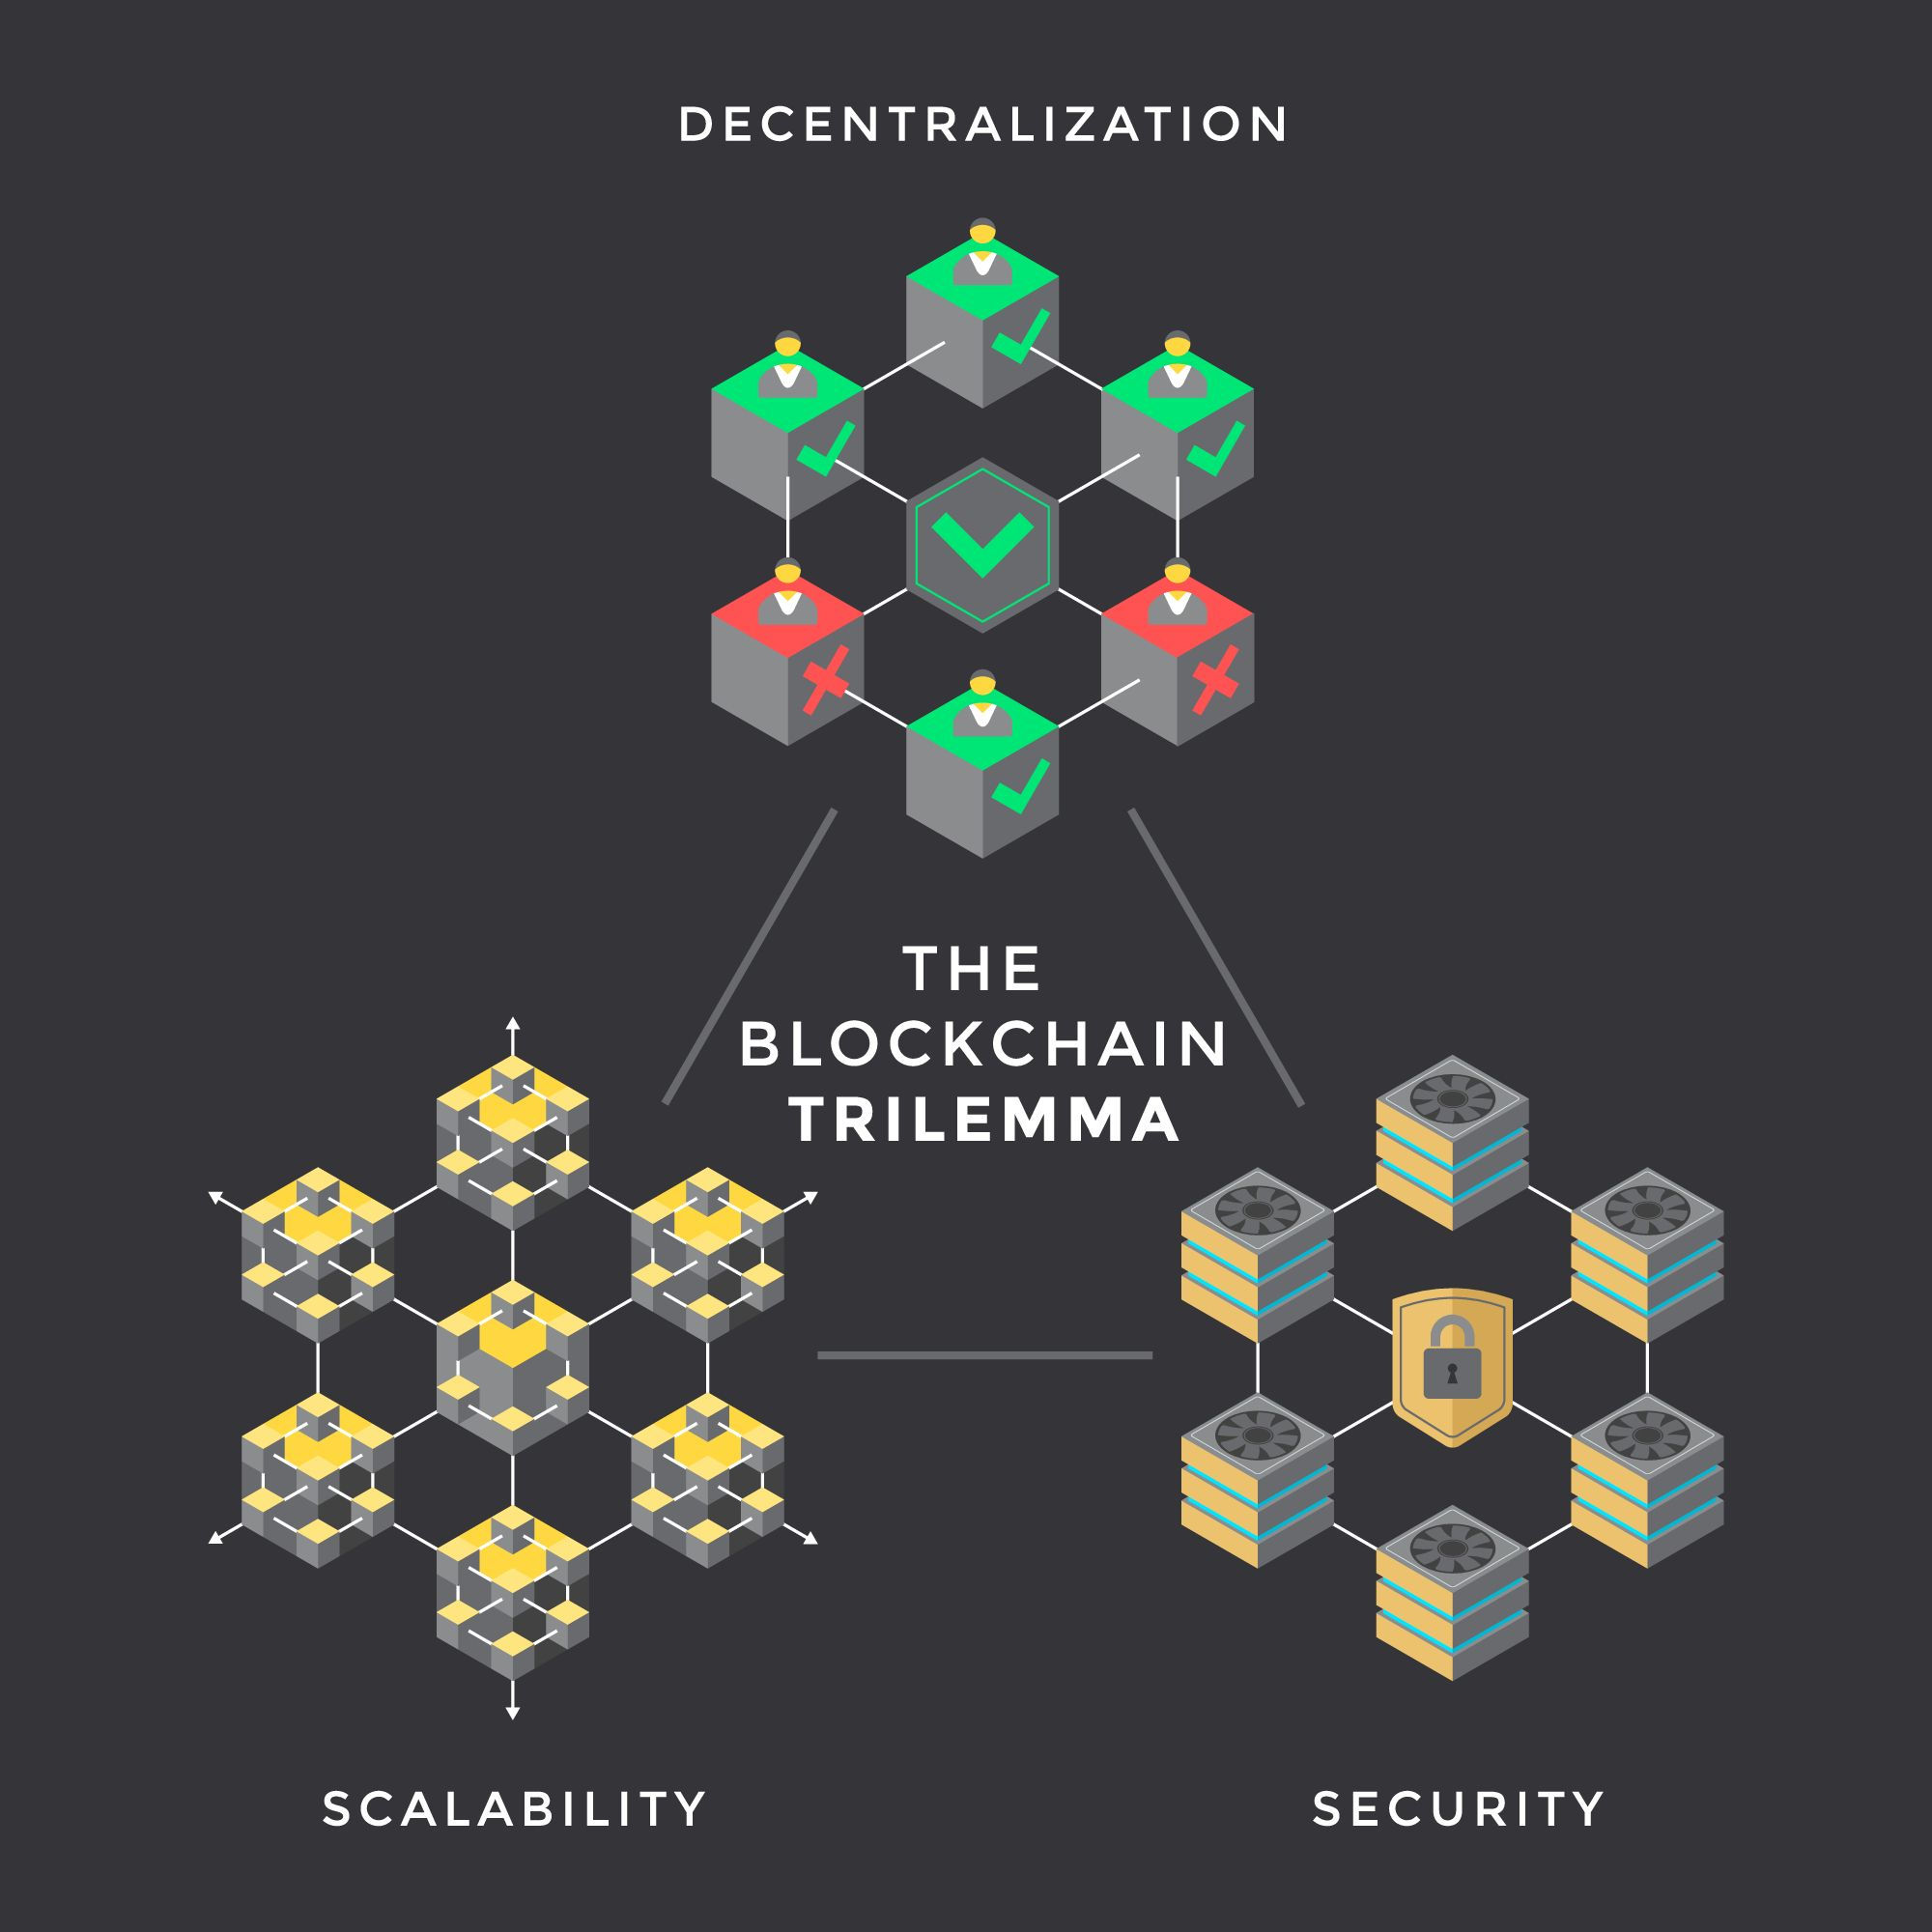 The Blockchain Trilemma: Decentralization, Scalability, and Security